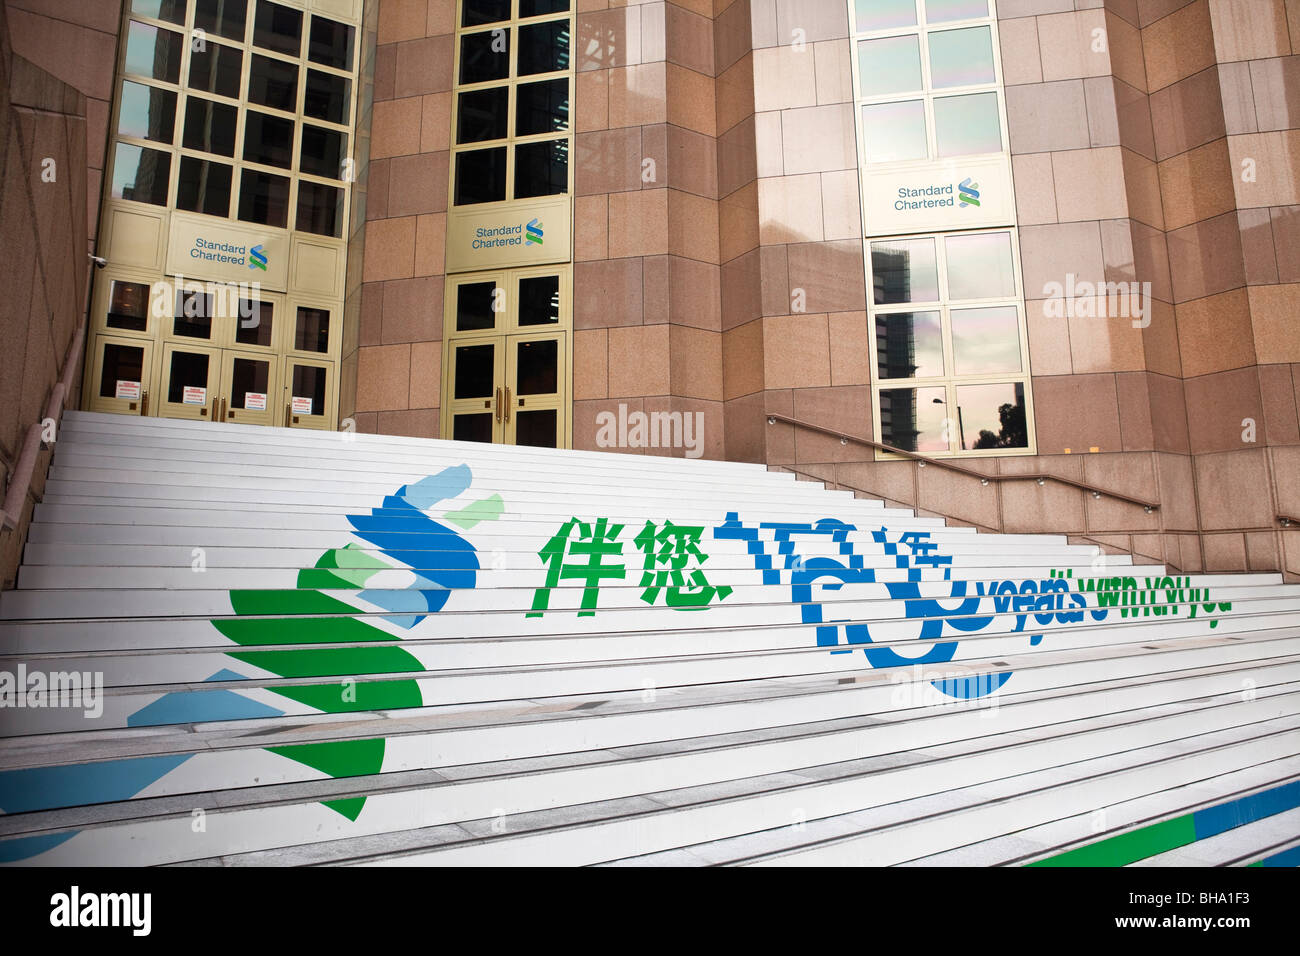 The steps to the main entrance of the Standard Chartered Bank headquarters in Hong Kong Stock Photo